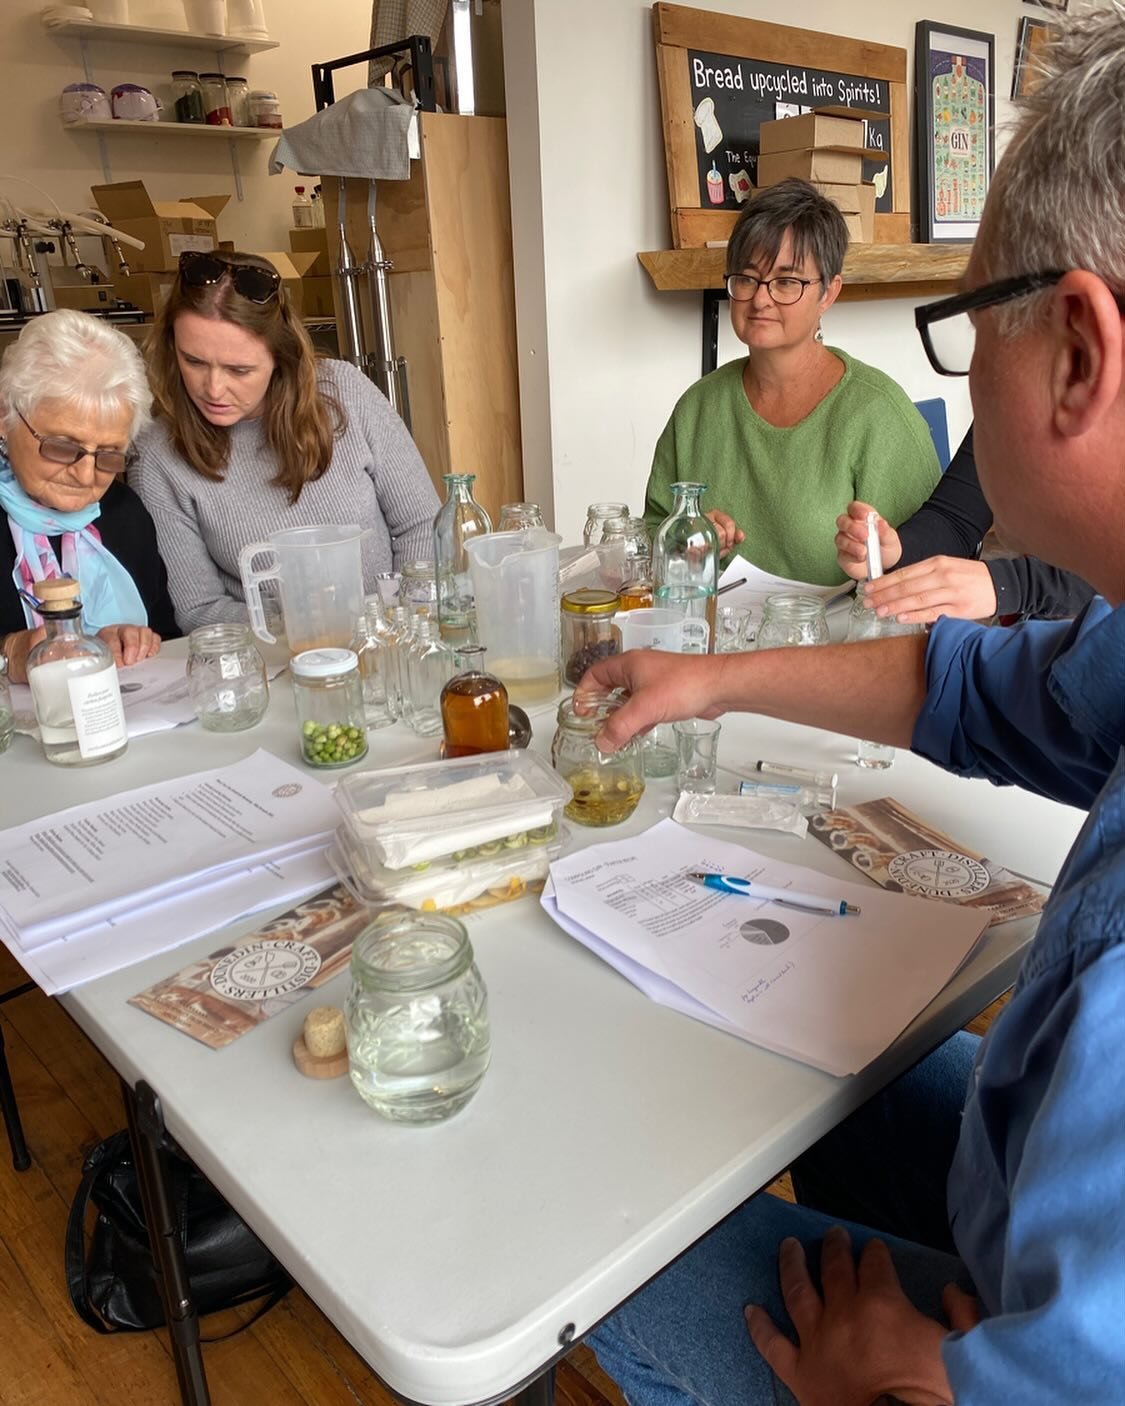 Great fun yesterday at the first of our @wilddunedin Blend Your Own Botanicals workshops. Great discussions and everyone very focused on blending their own gin using our upcycled bread base spirit. Looking forward to doing it all again on Friday 😀 #